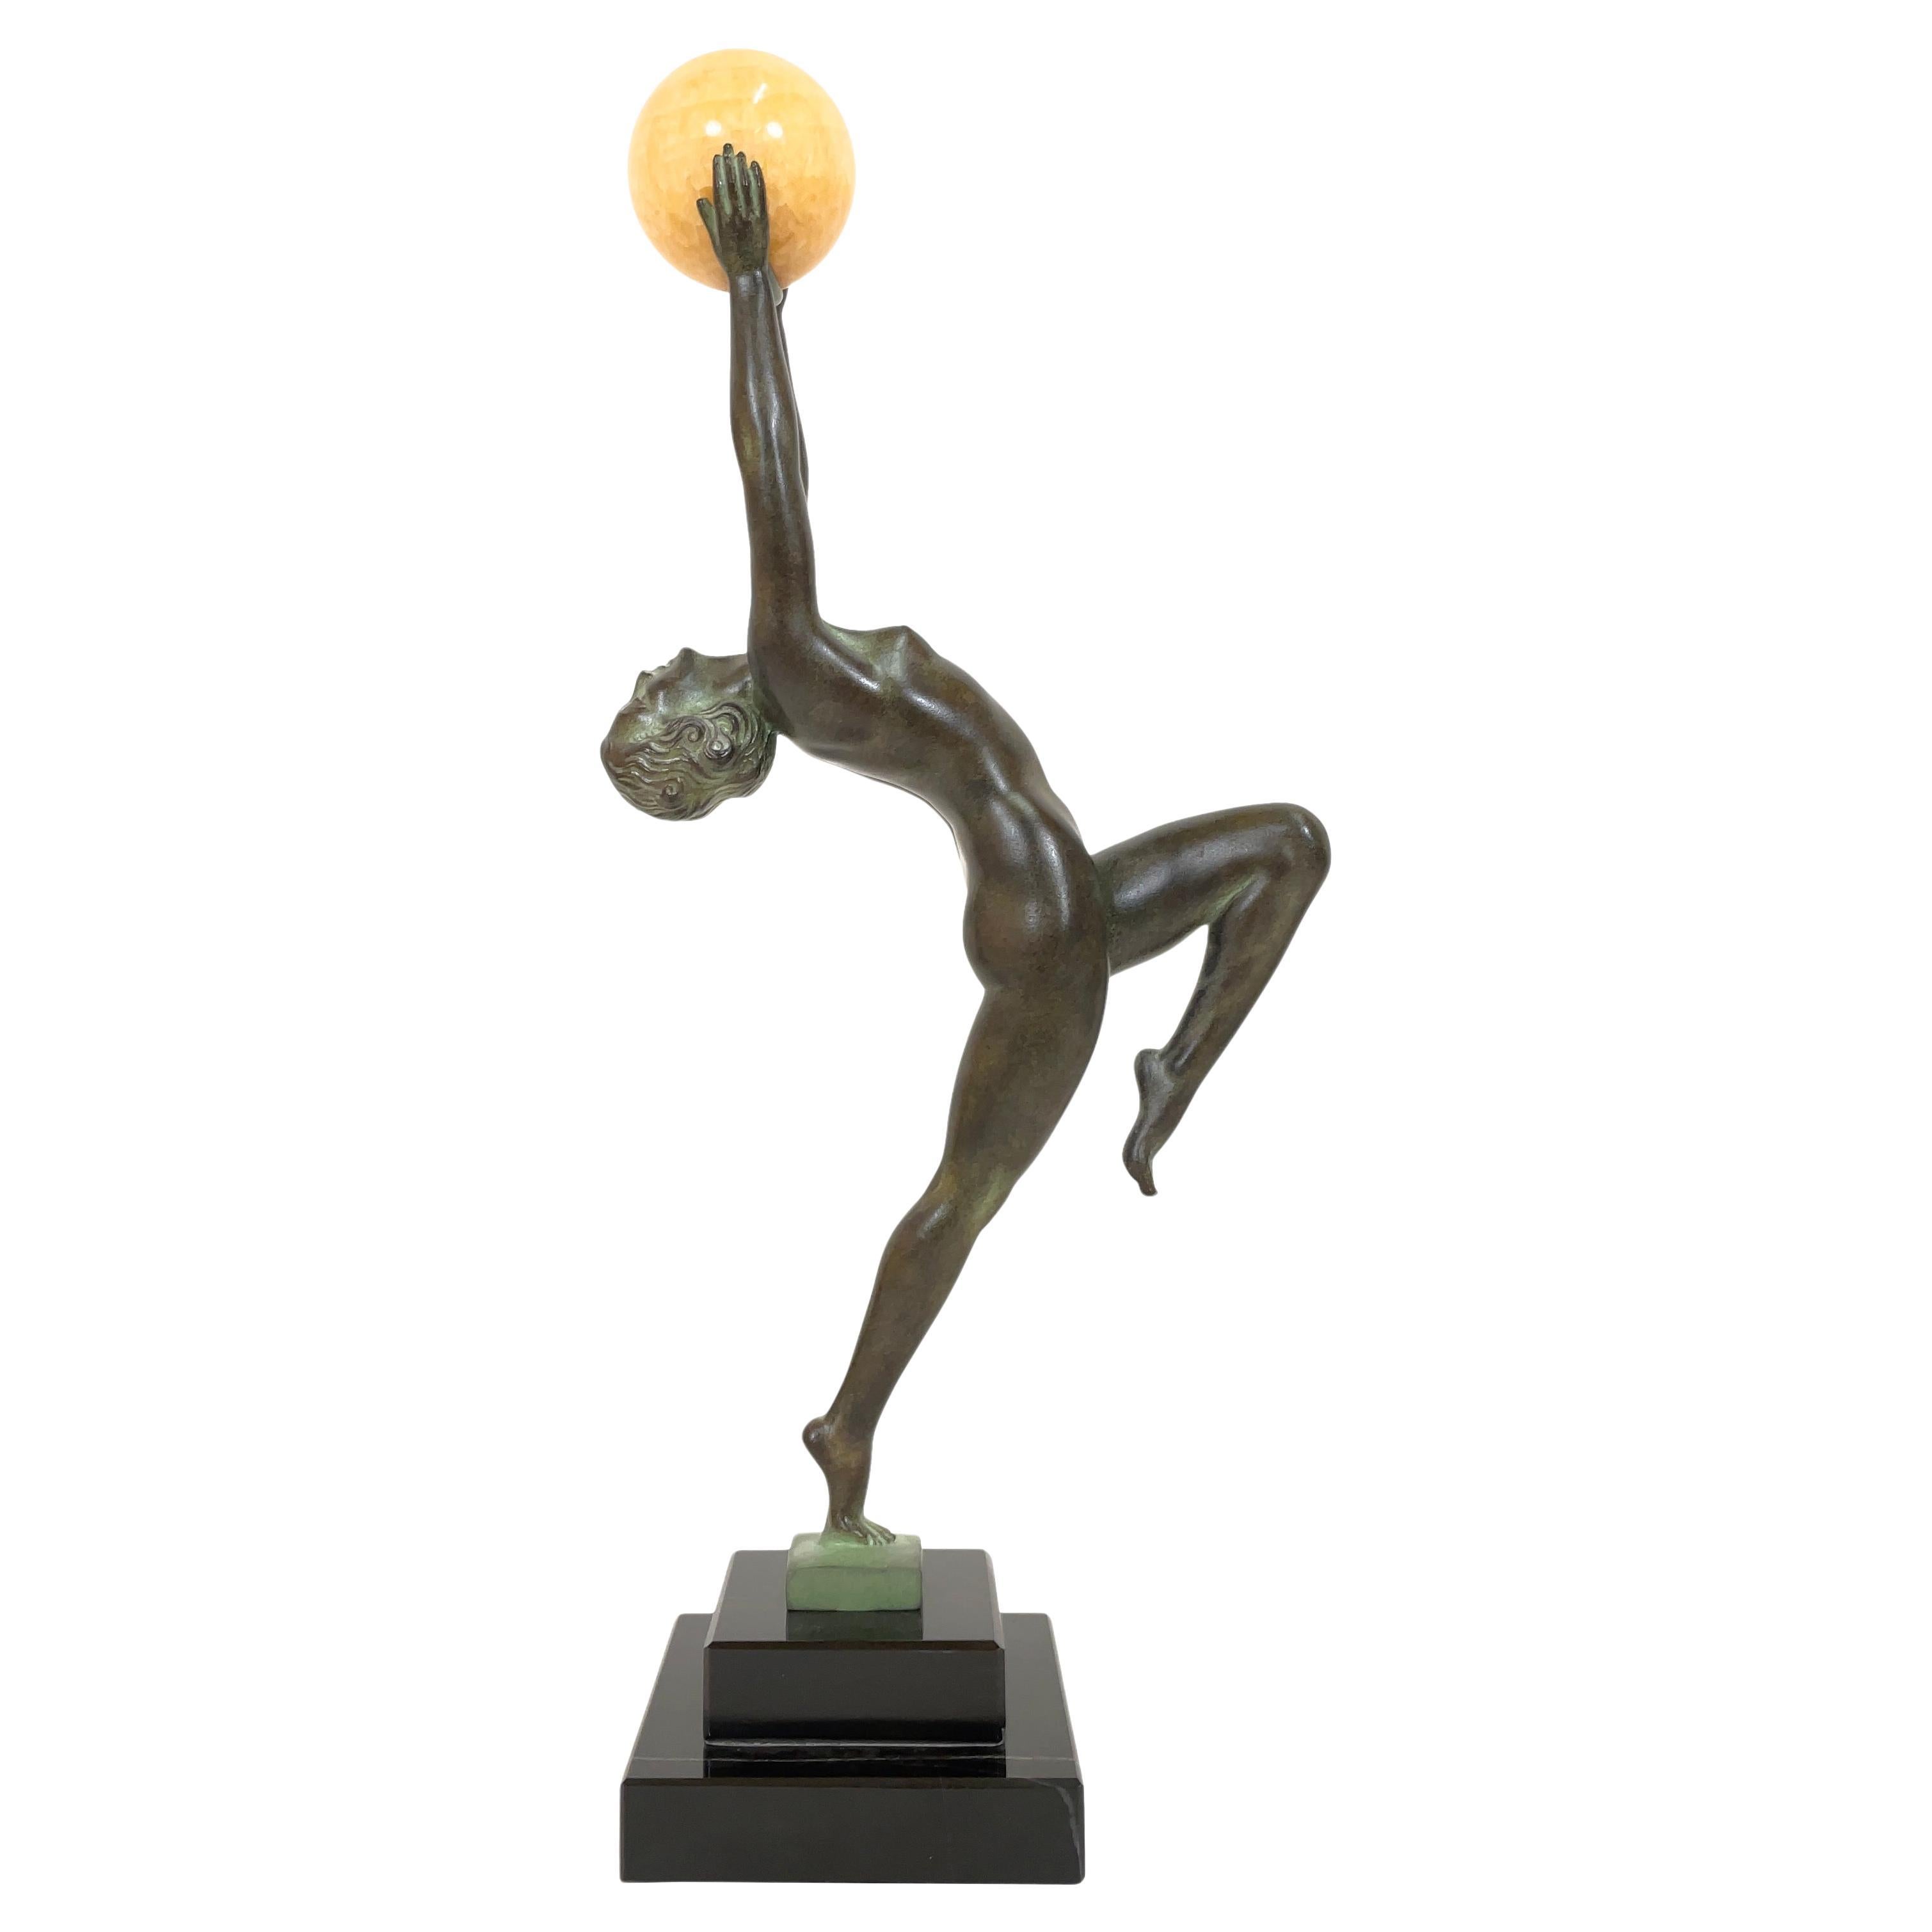 Dancer Sculpture Jeu with a Jade Ball from Max Le Verrier in Art Deco Style